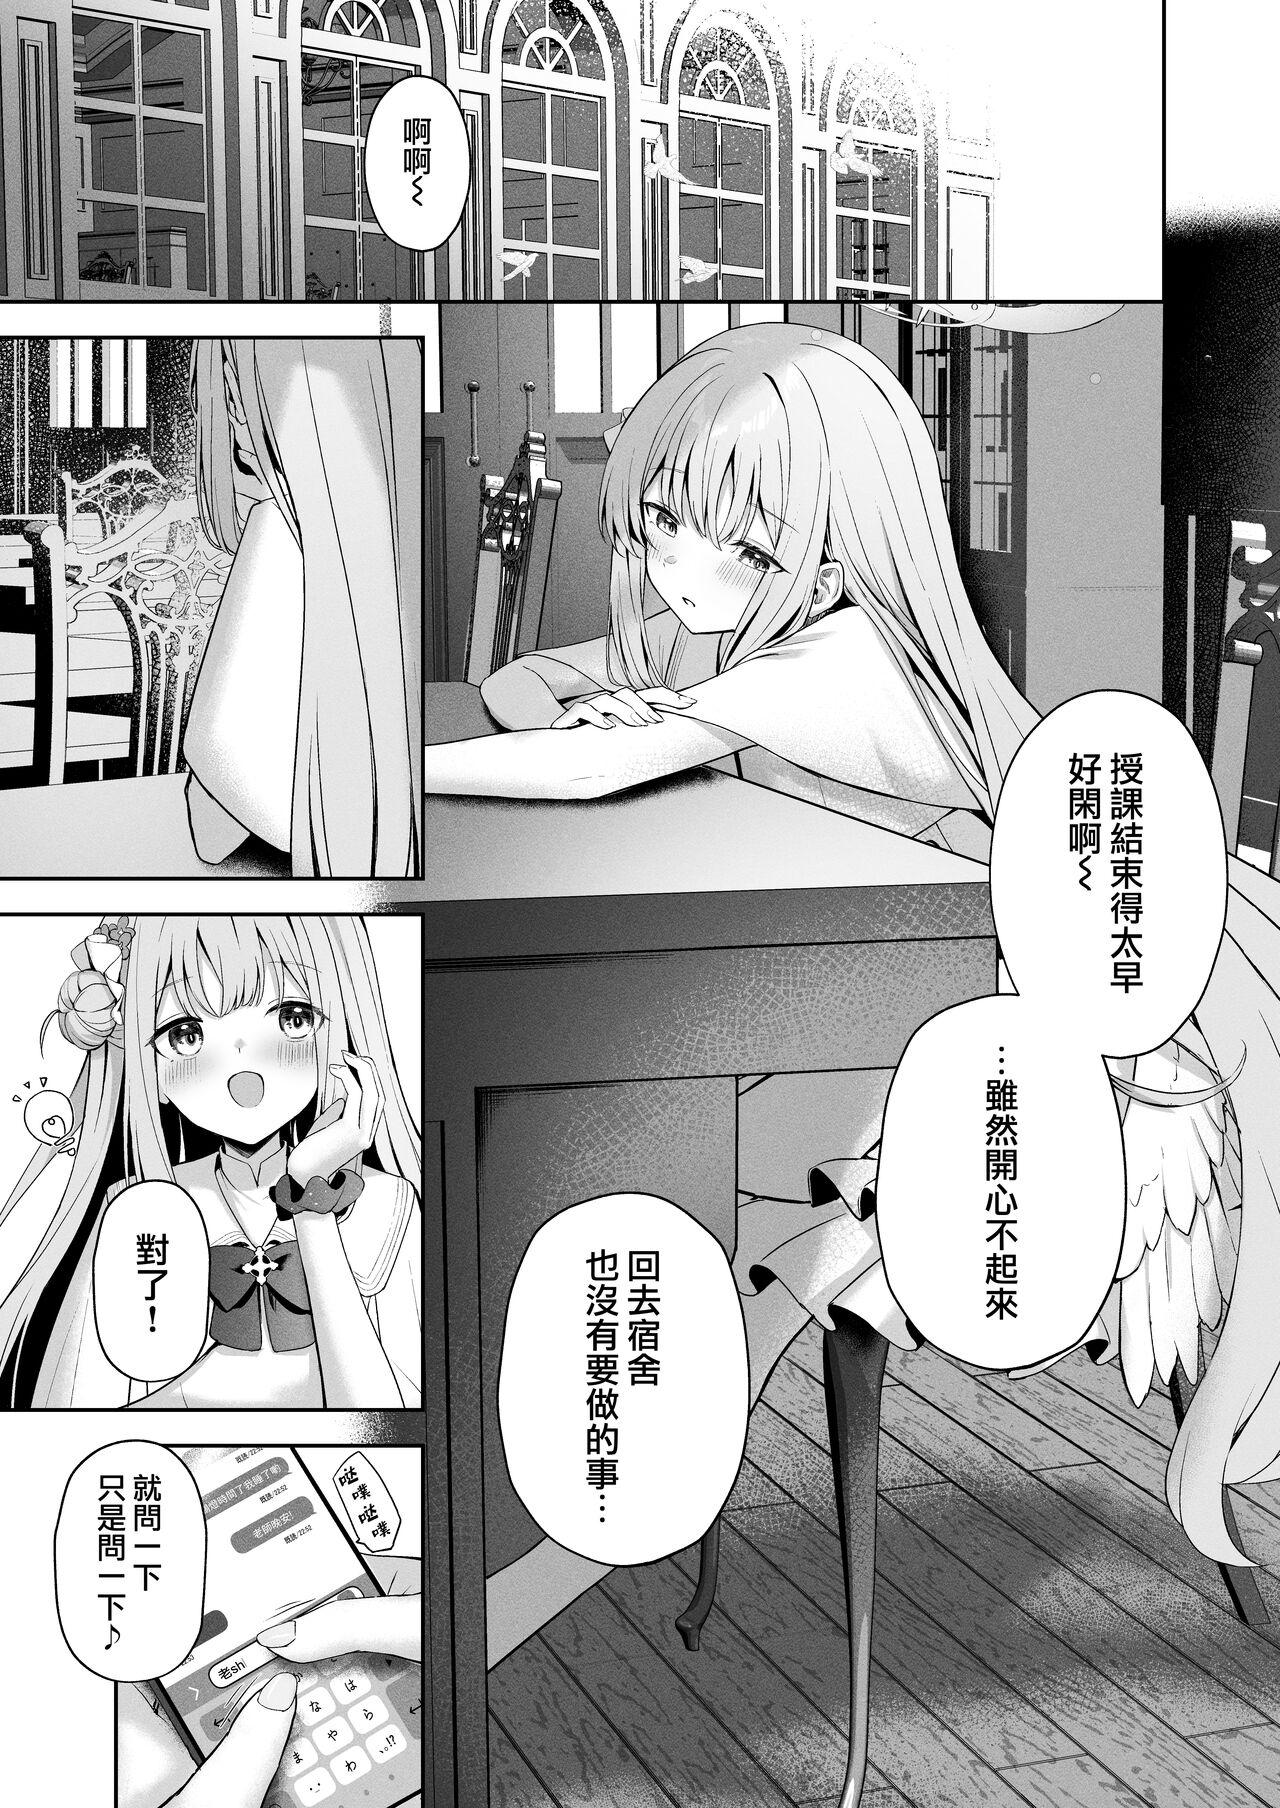 Glasses Mikazuki no Pierce Hole - Pierce Hole of The Cresent Moon - Blue archive Stroking - Page 3